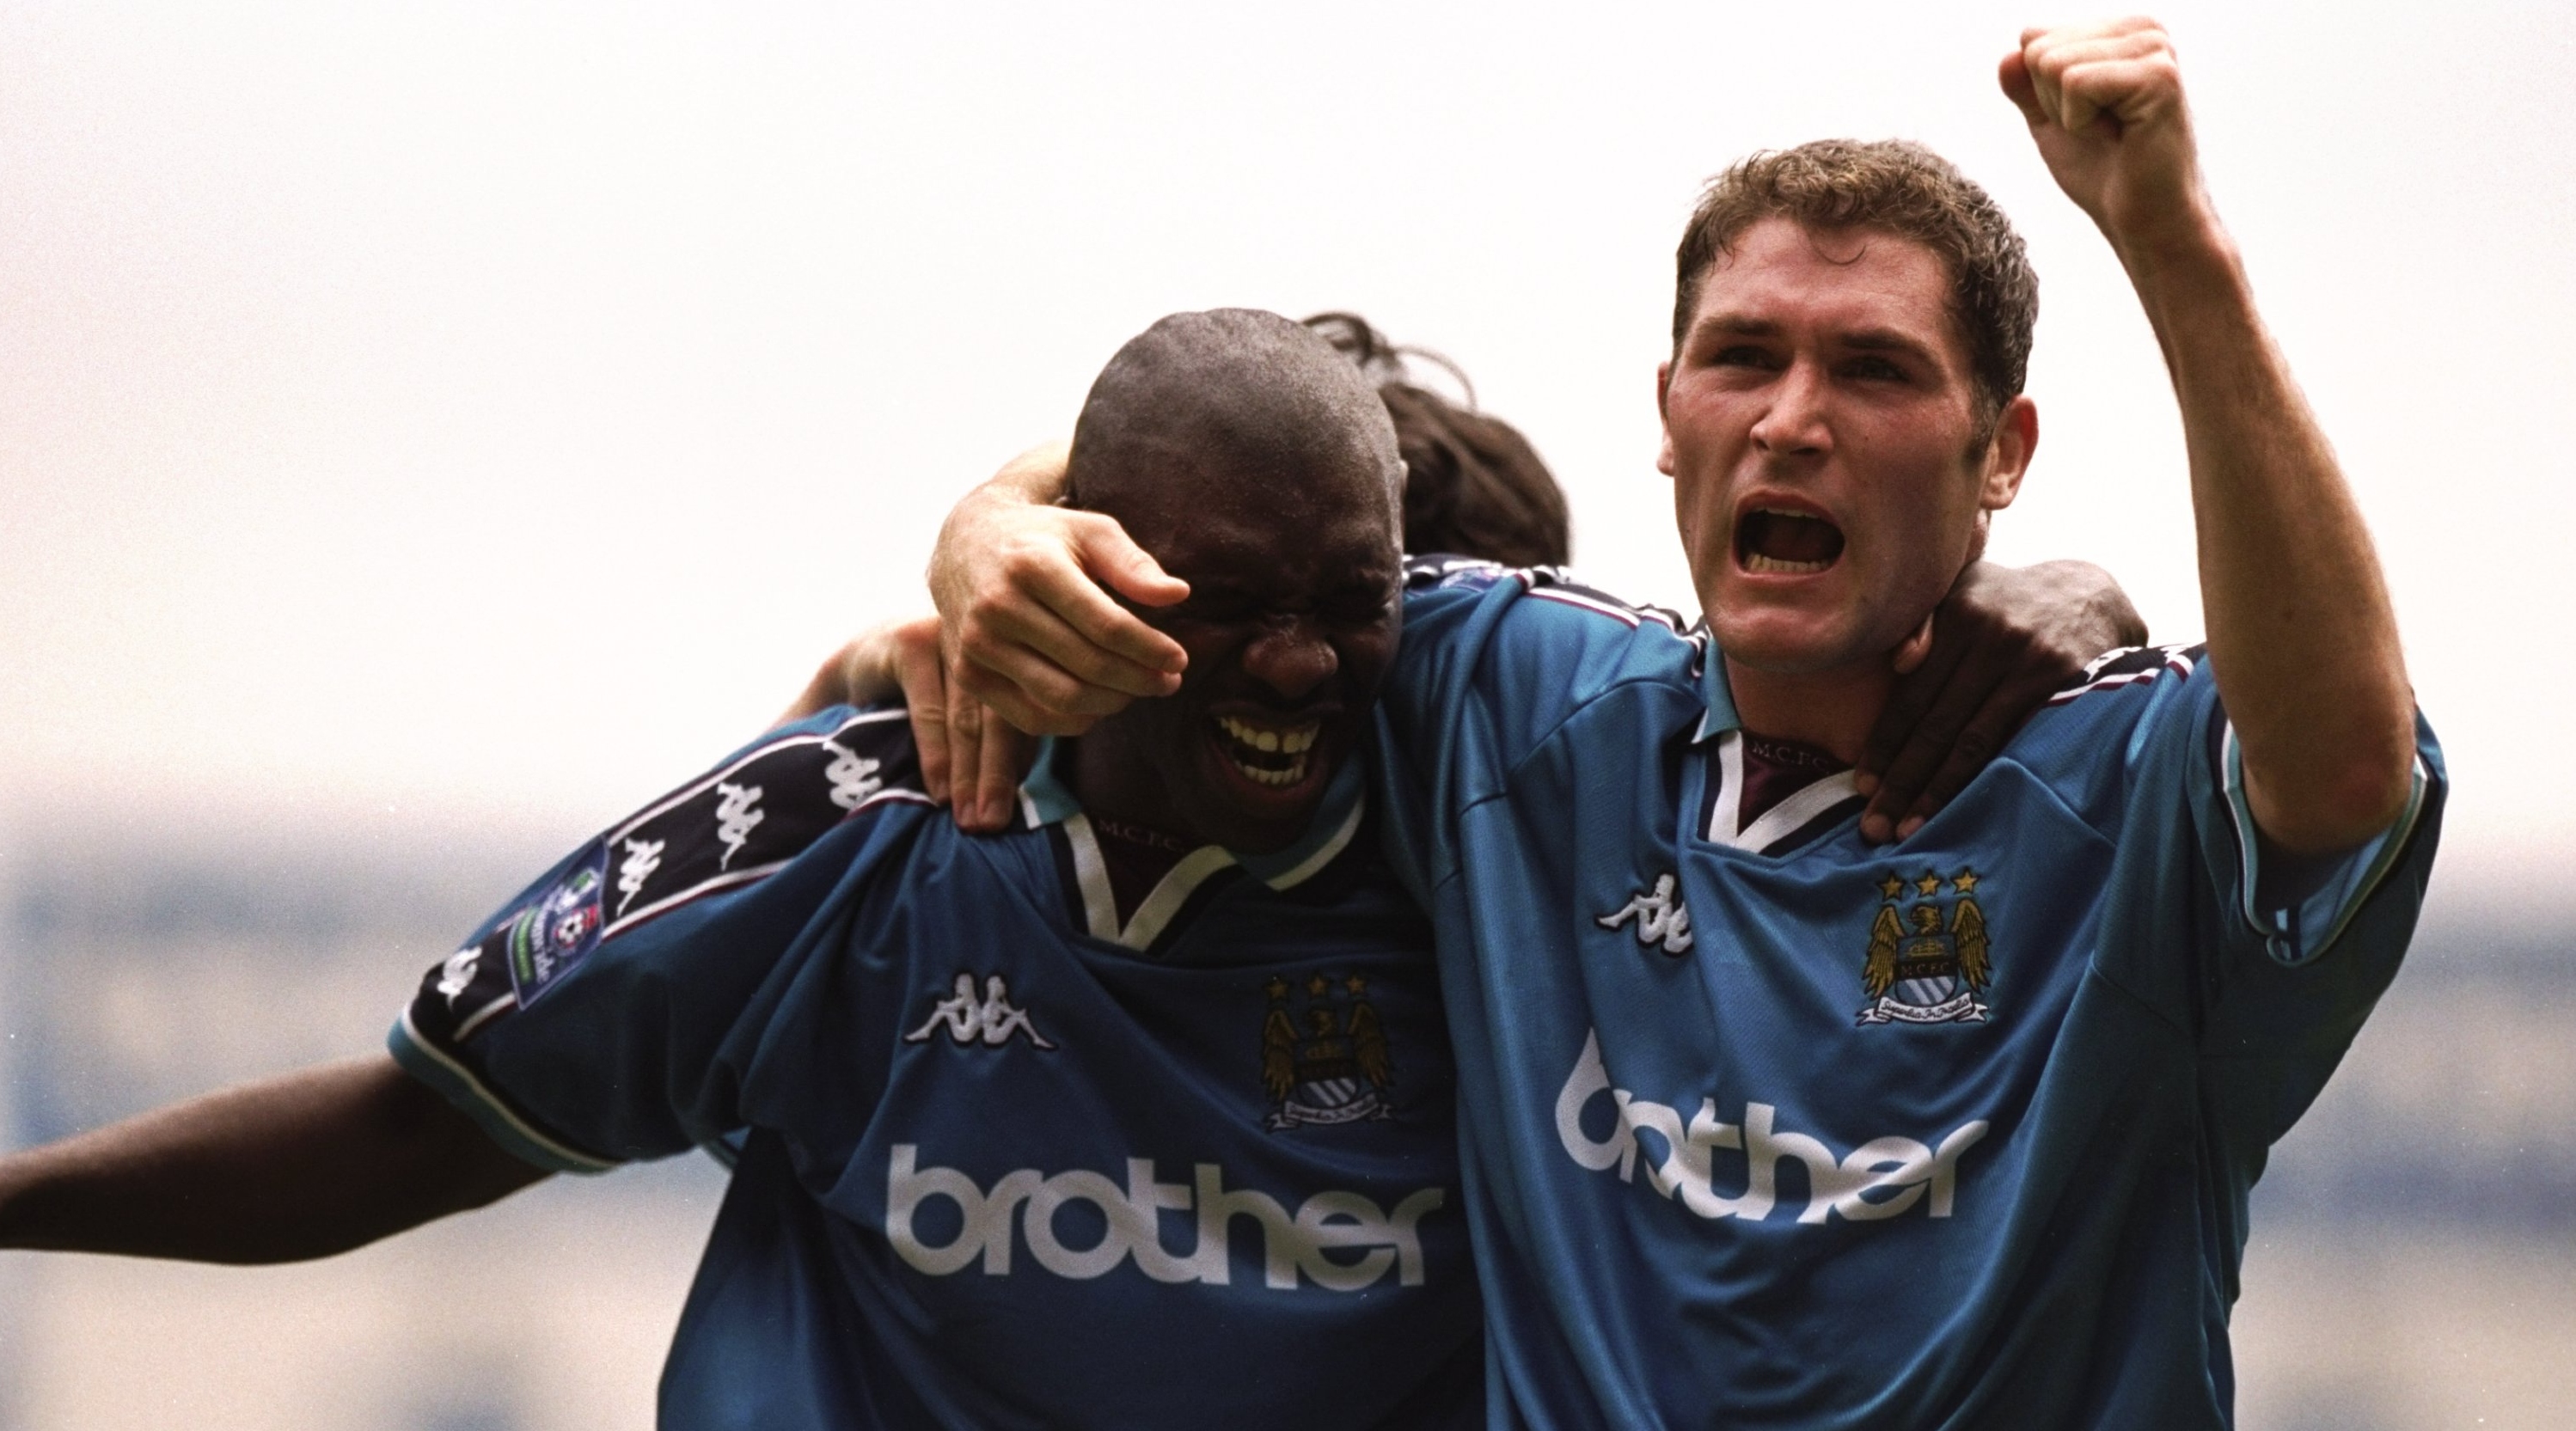 8 Aug 1998: Shaun Goater of Manchester City and team mate Lee Bradbury celebrate during the Nationwide Division One game against Blackpool at Maine Road in Manchester, England. City won 3-0.  Mandatory Credit: Ross Kinnaird /Allsport